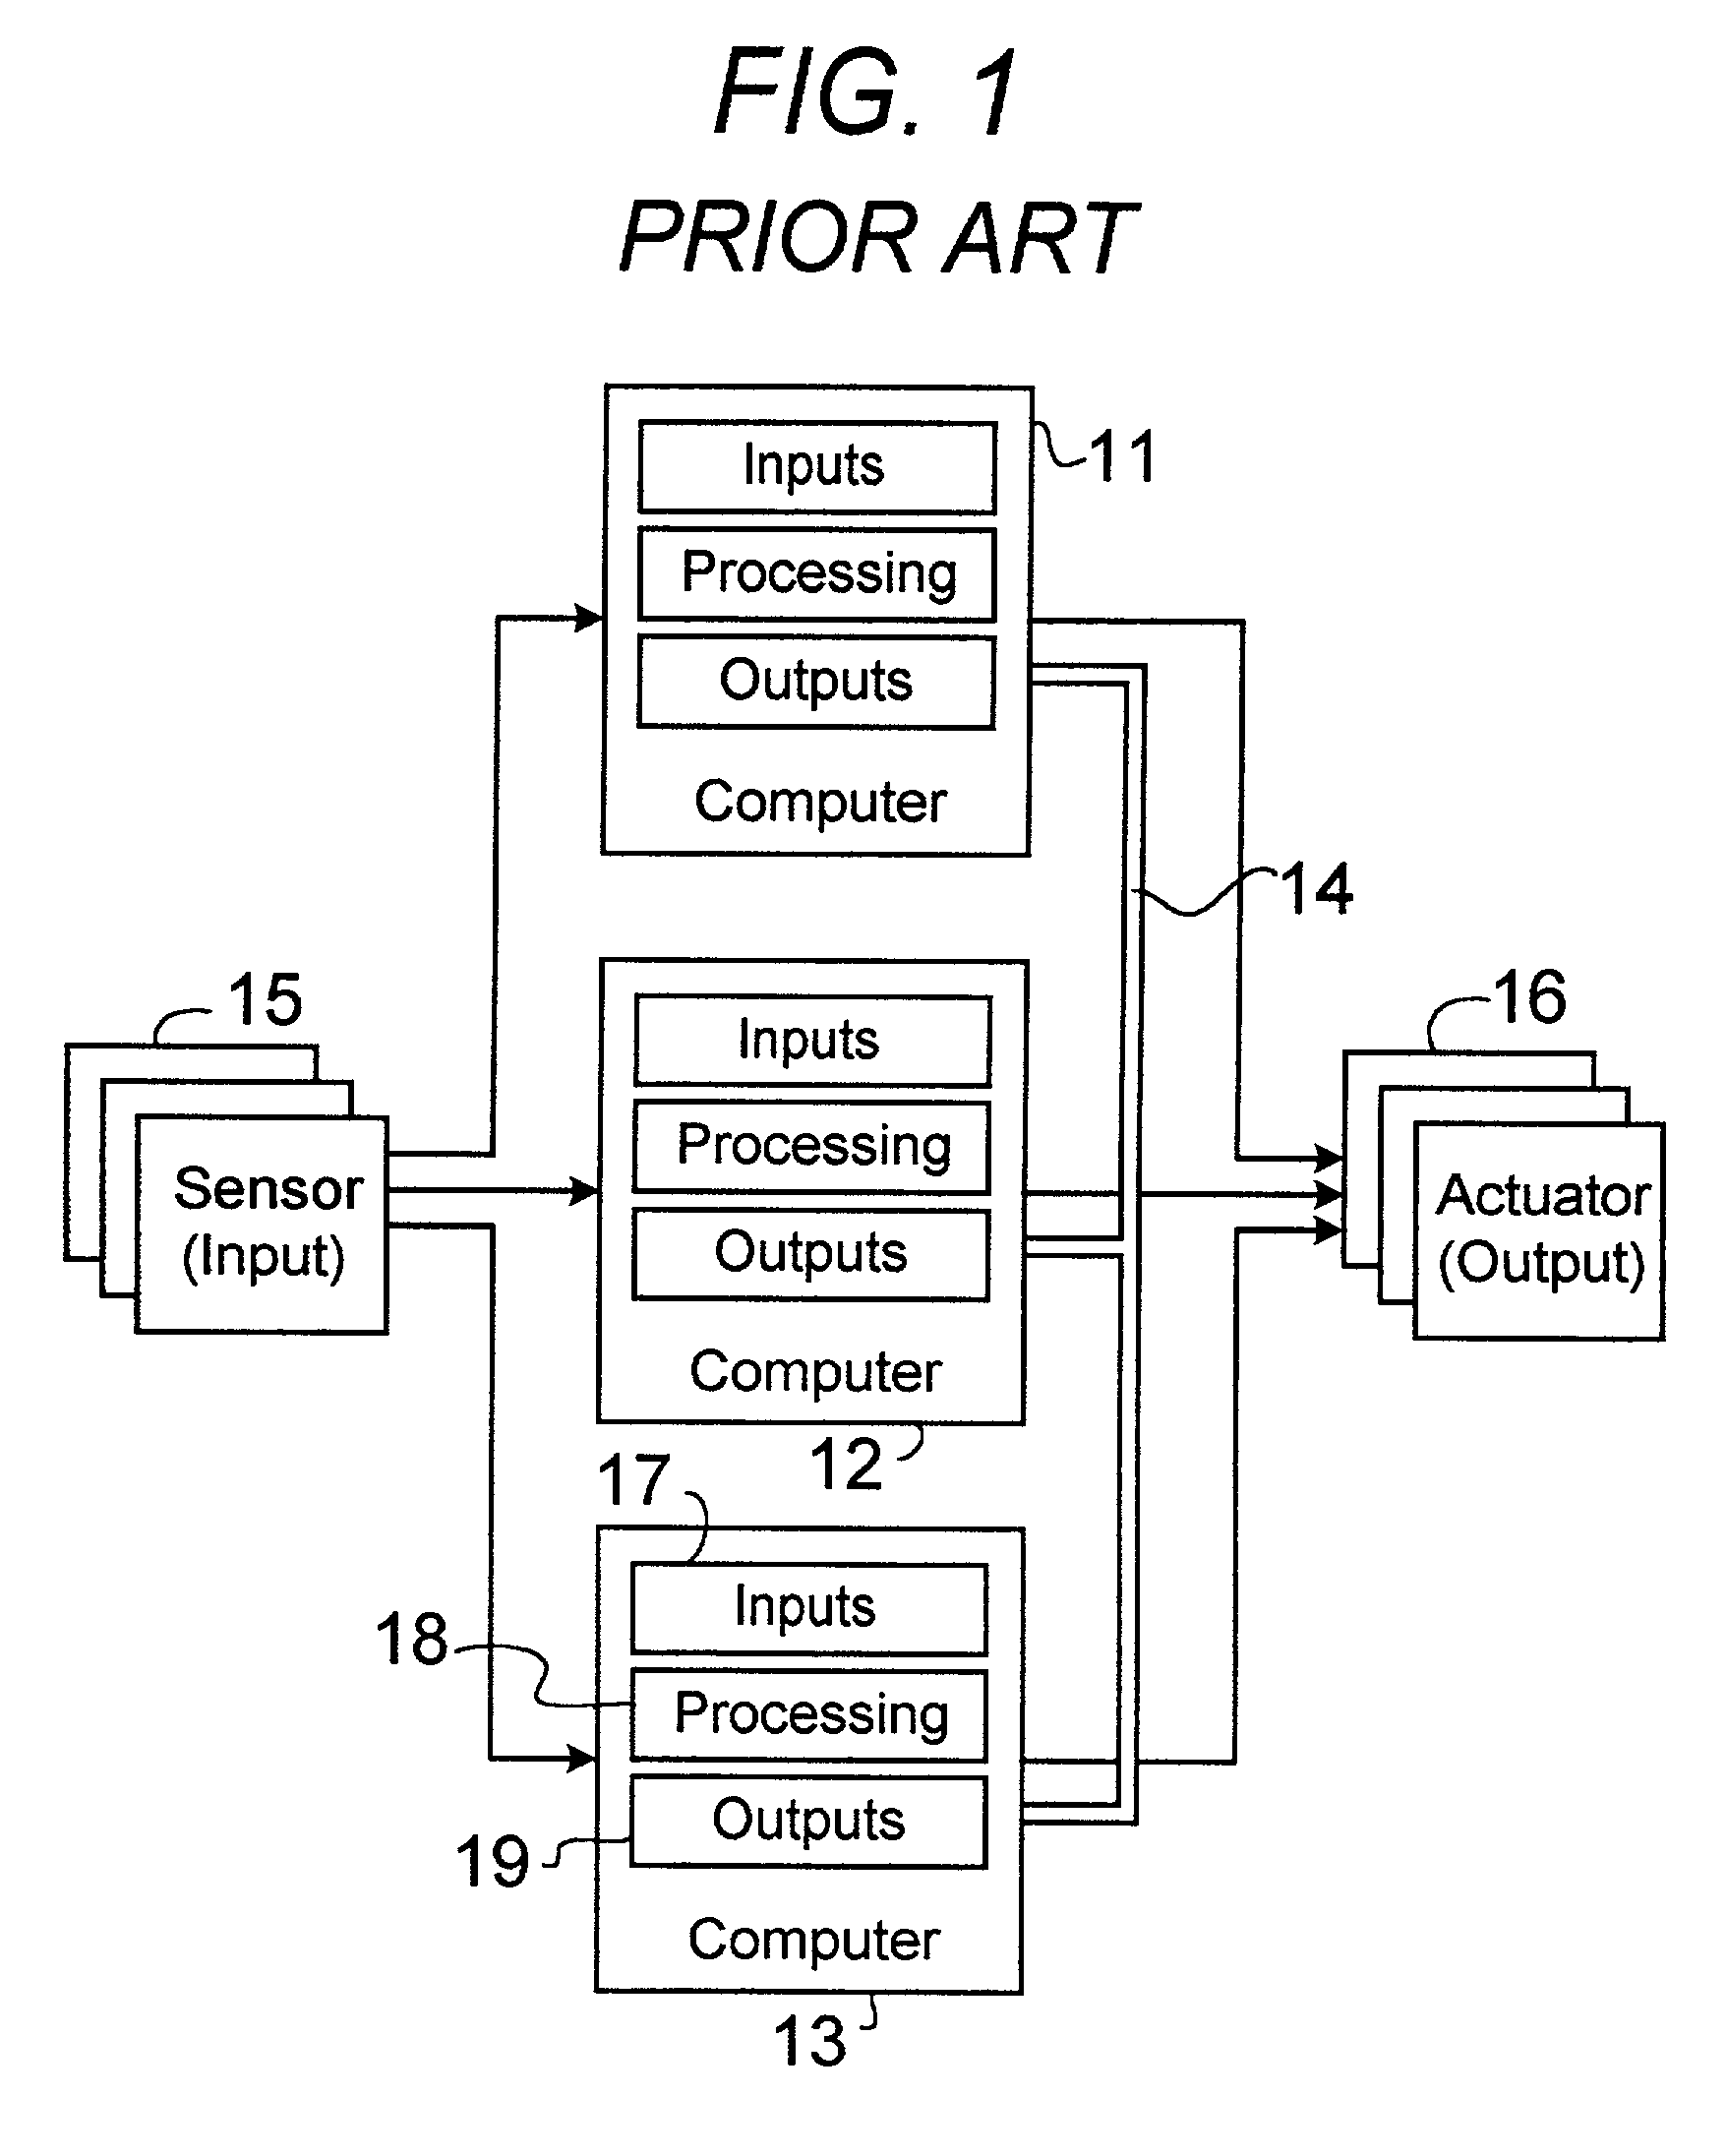 Method of recovering a flight critical computer after a radiation event